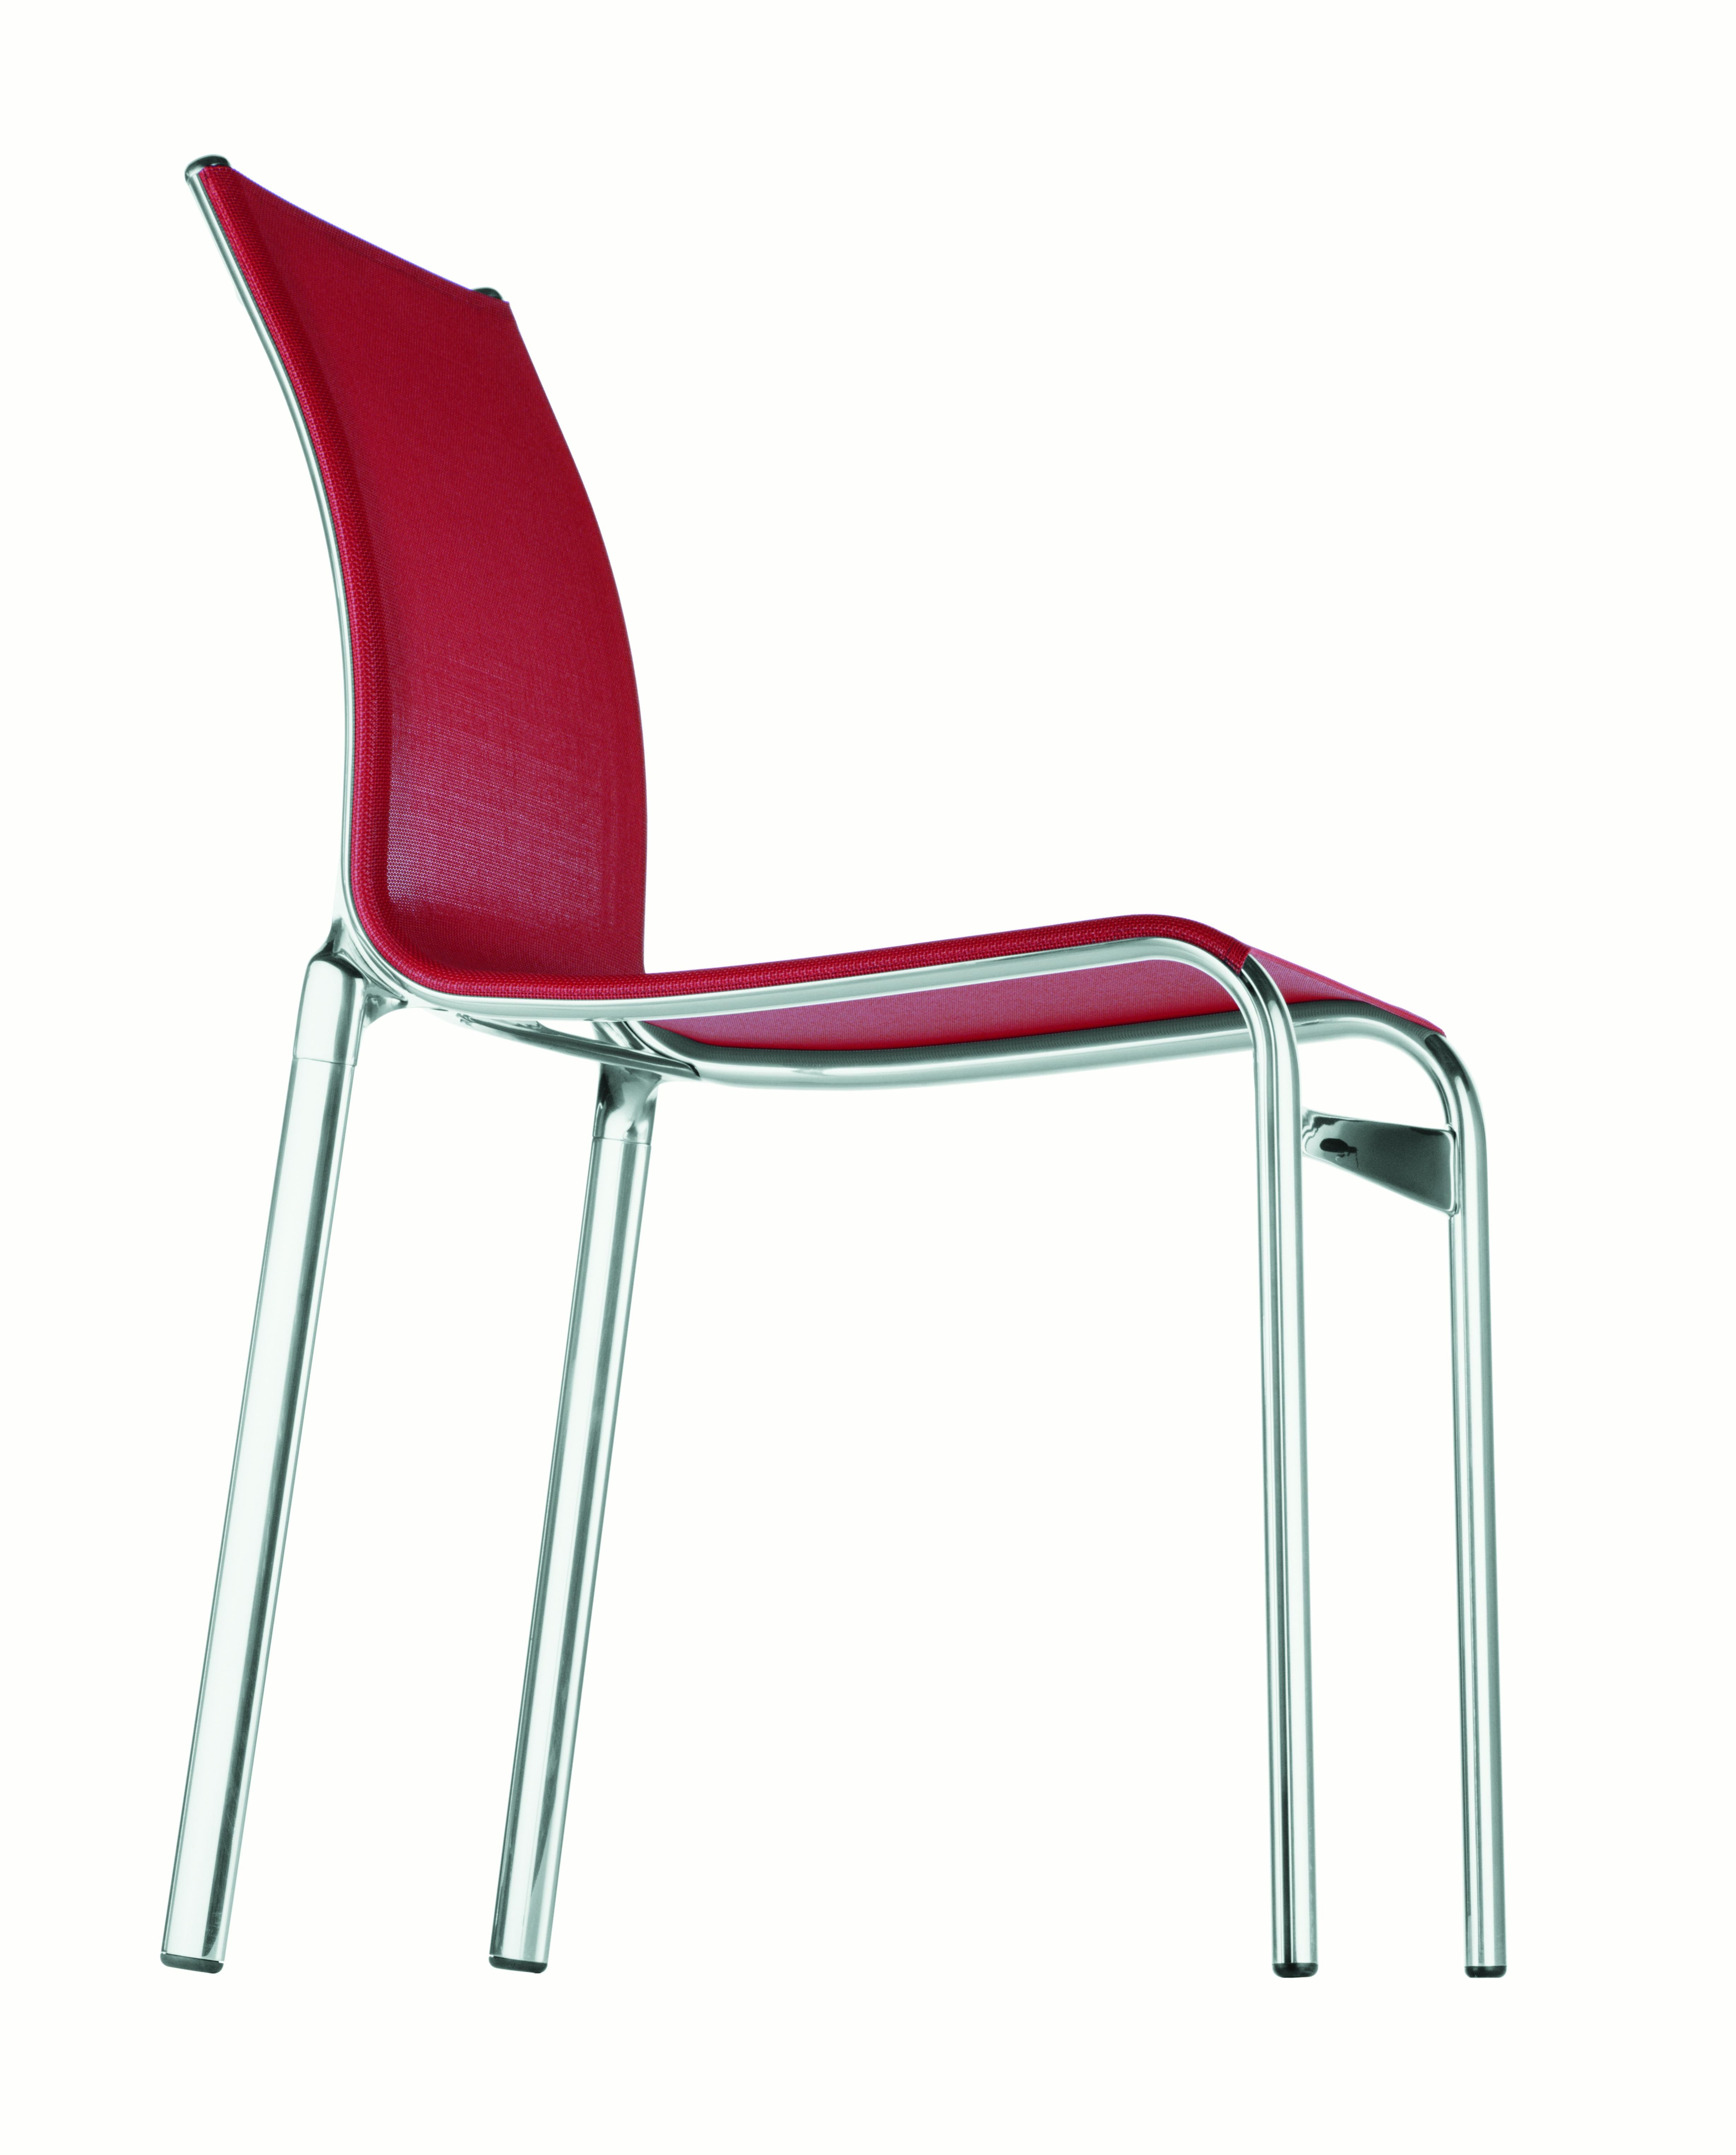 Alias Bigframe 44 Chair in Red Mesh with Chromed Aluminium Frame by Alberto Meda

Stacking chair with structure made of extruded aluminium profile and die-cast aluminium elements. Seat and back in fire retardant PVC covered polyester mesh, in